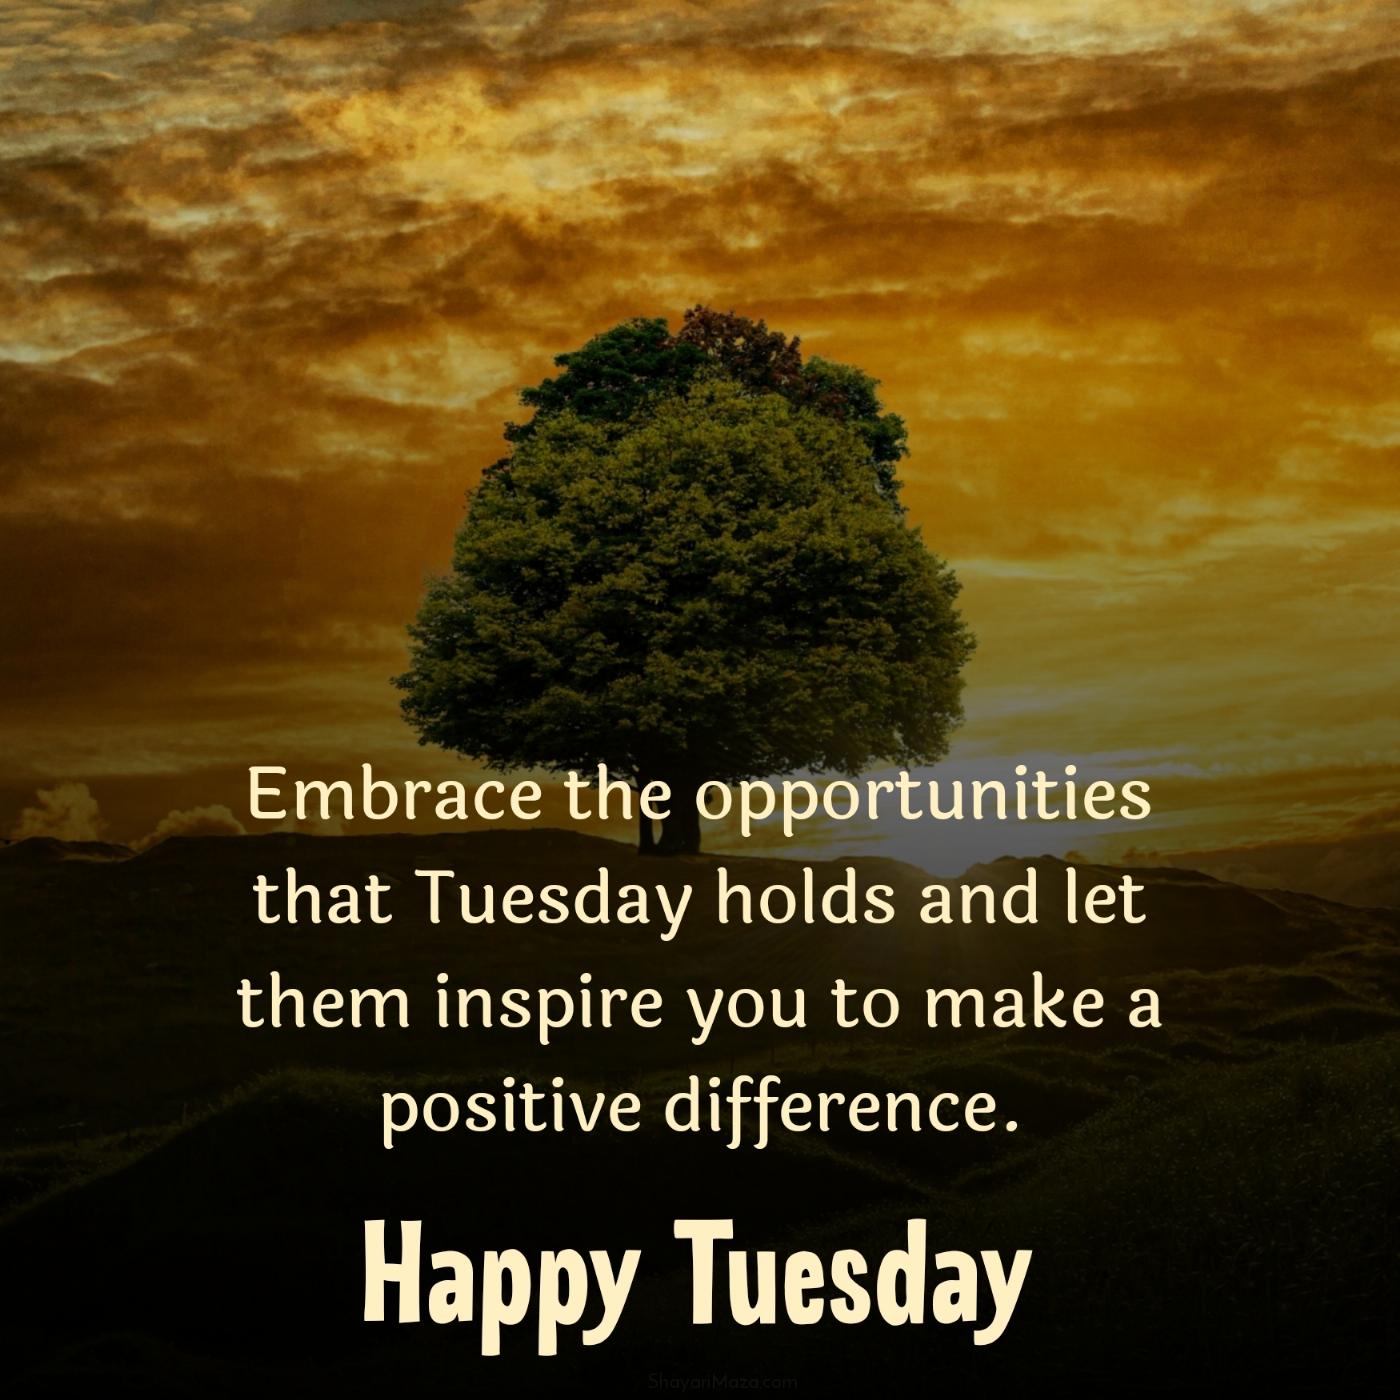 Embrace the opportunities that Tuesday holds